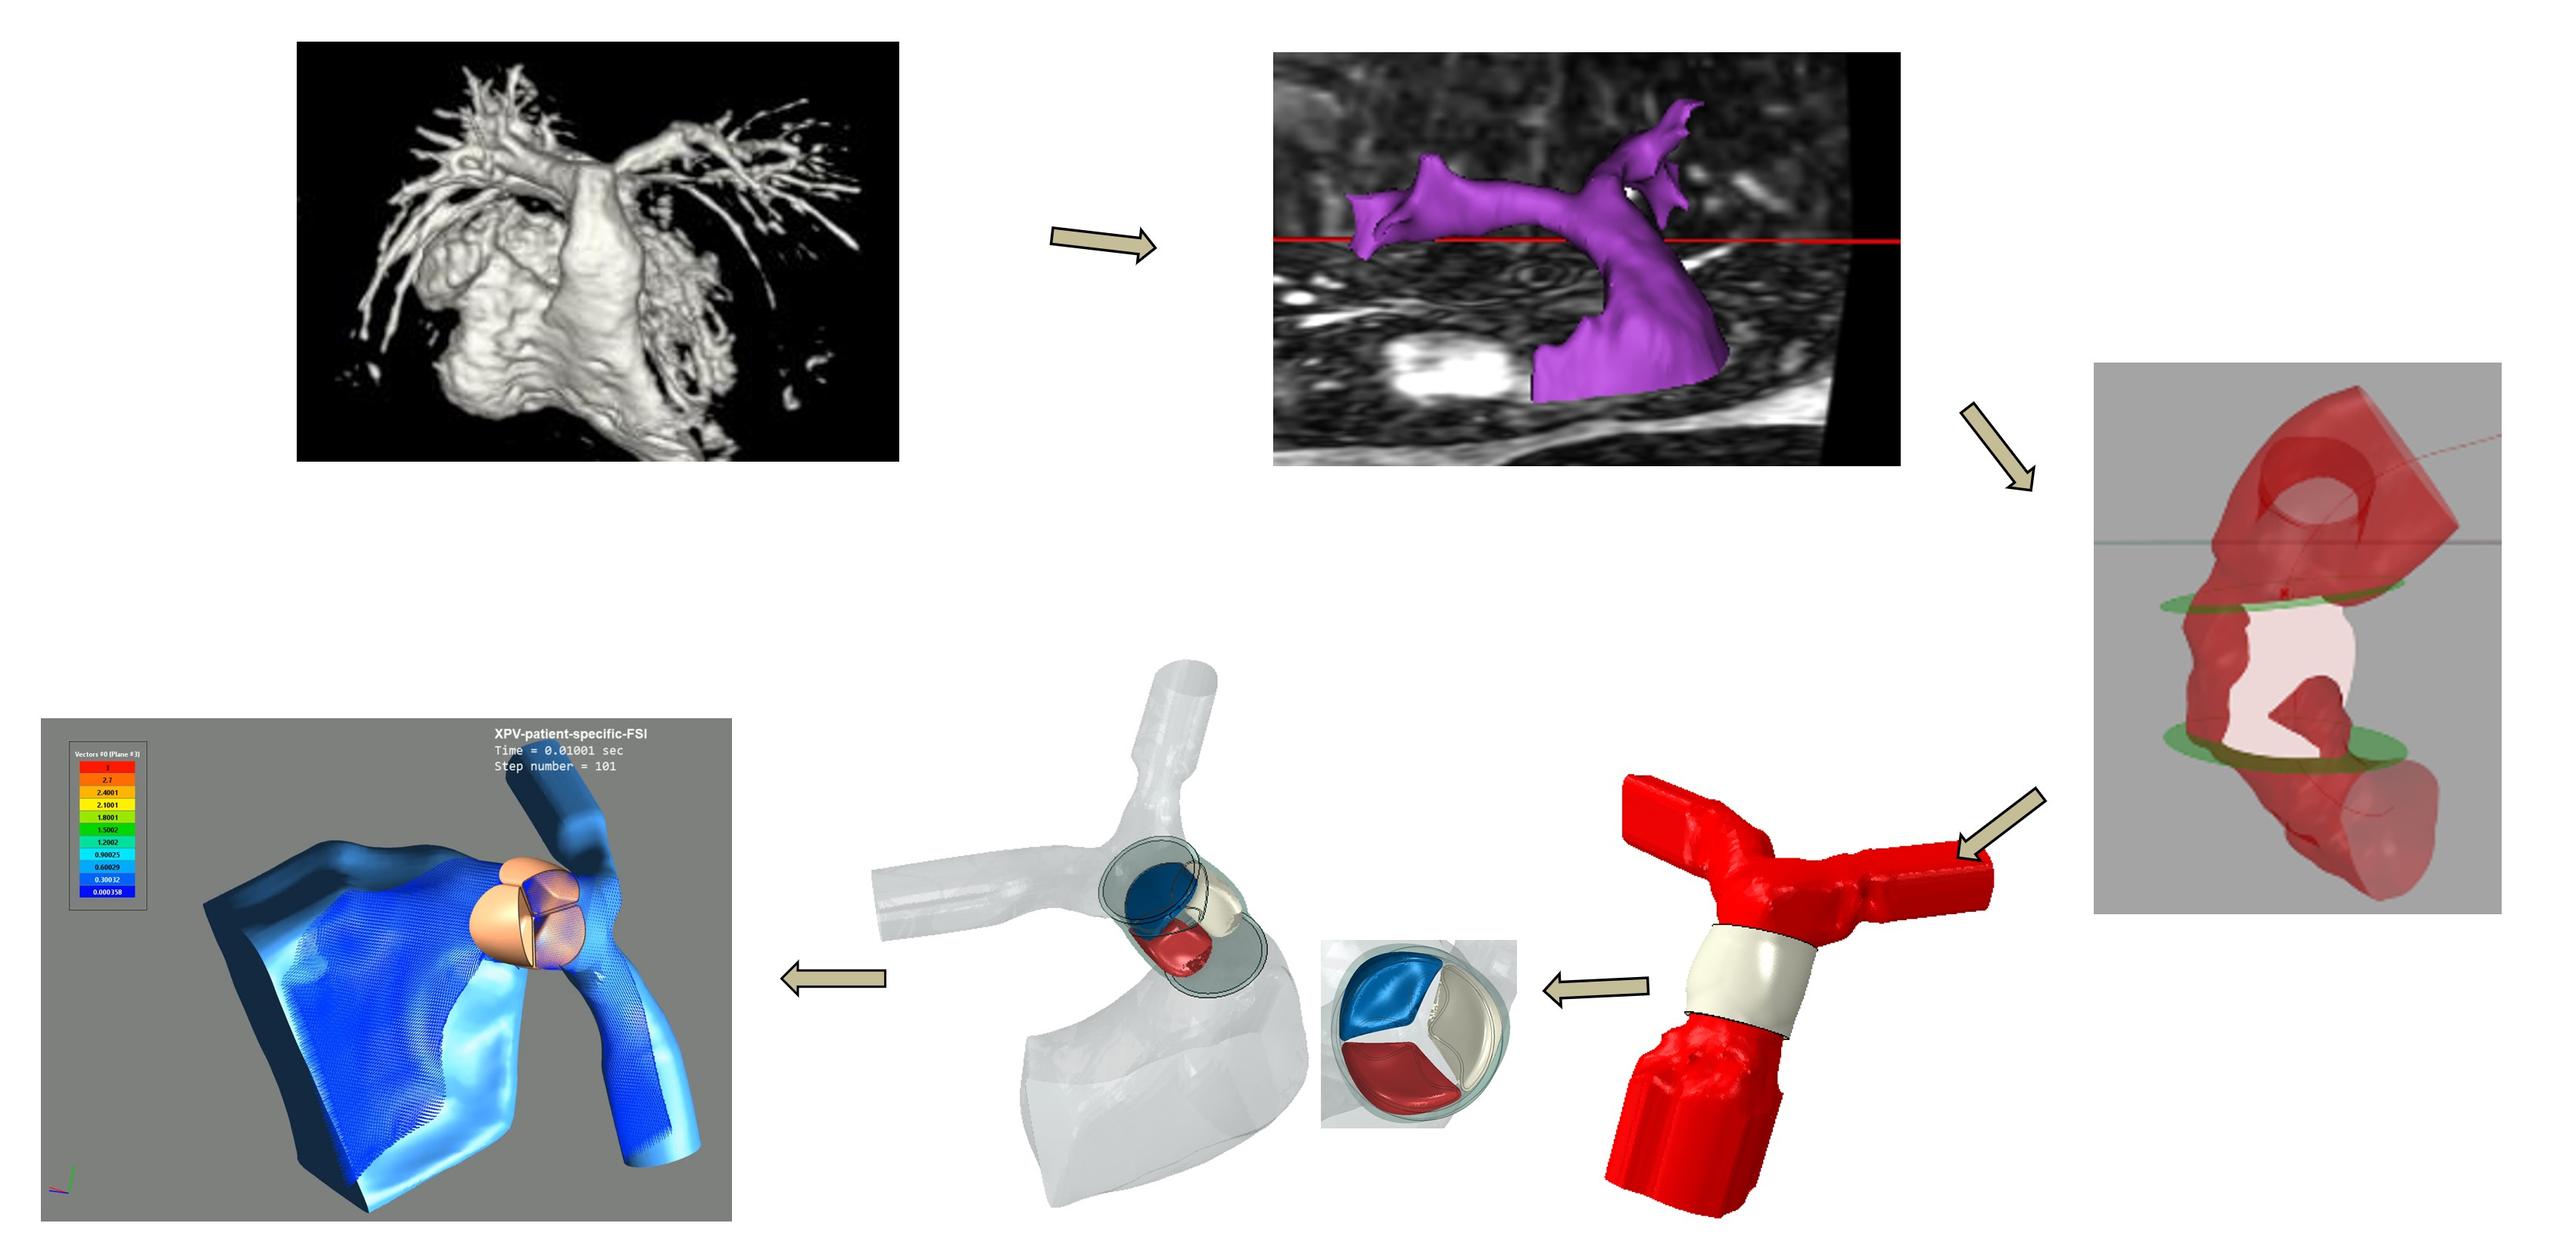 Milestone #15 successfully achieved through patient-specific modeling of tissue-engineered heart valves in young patients